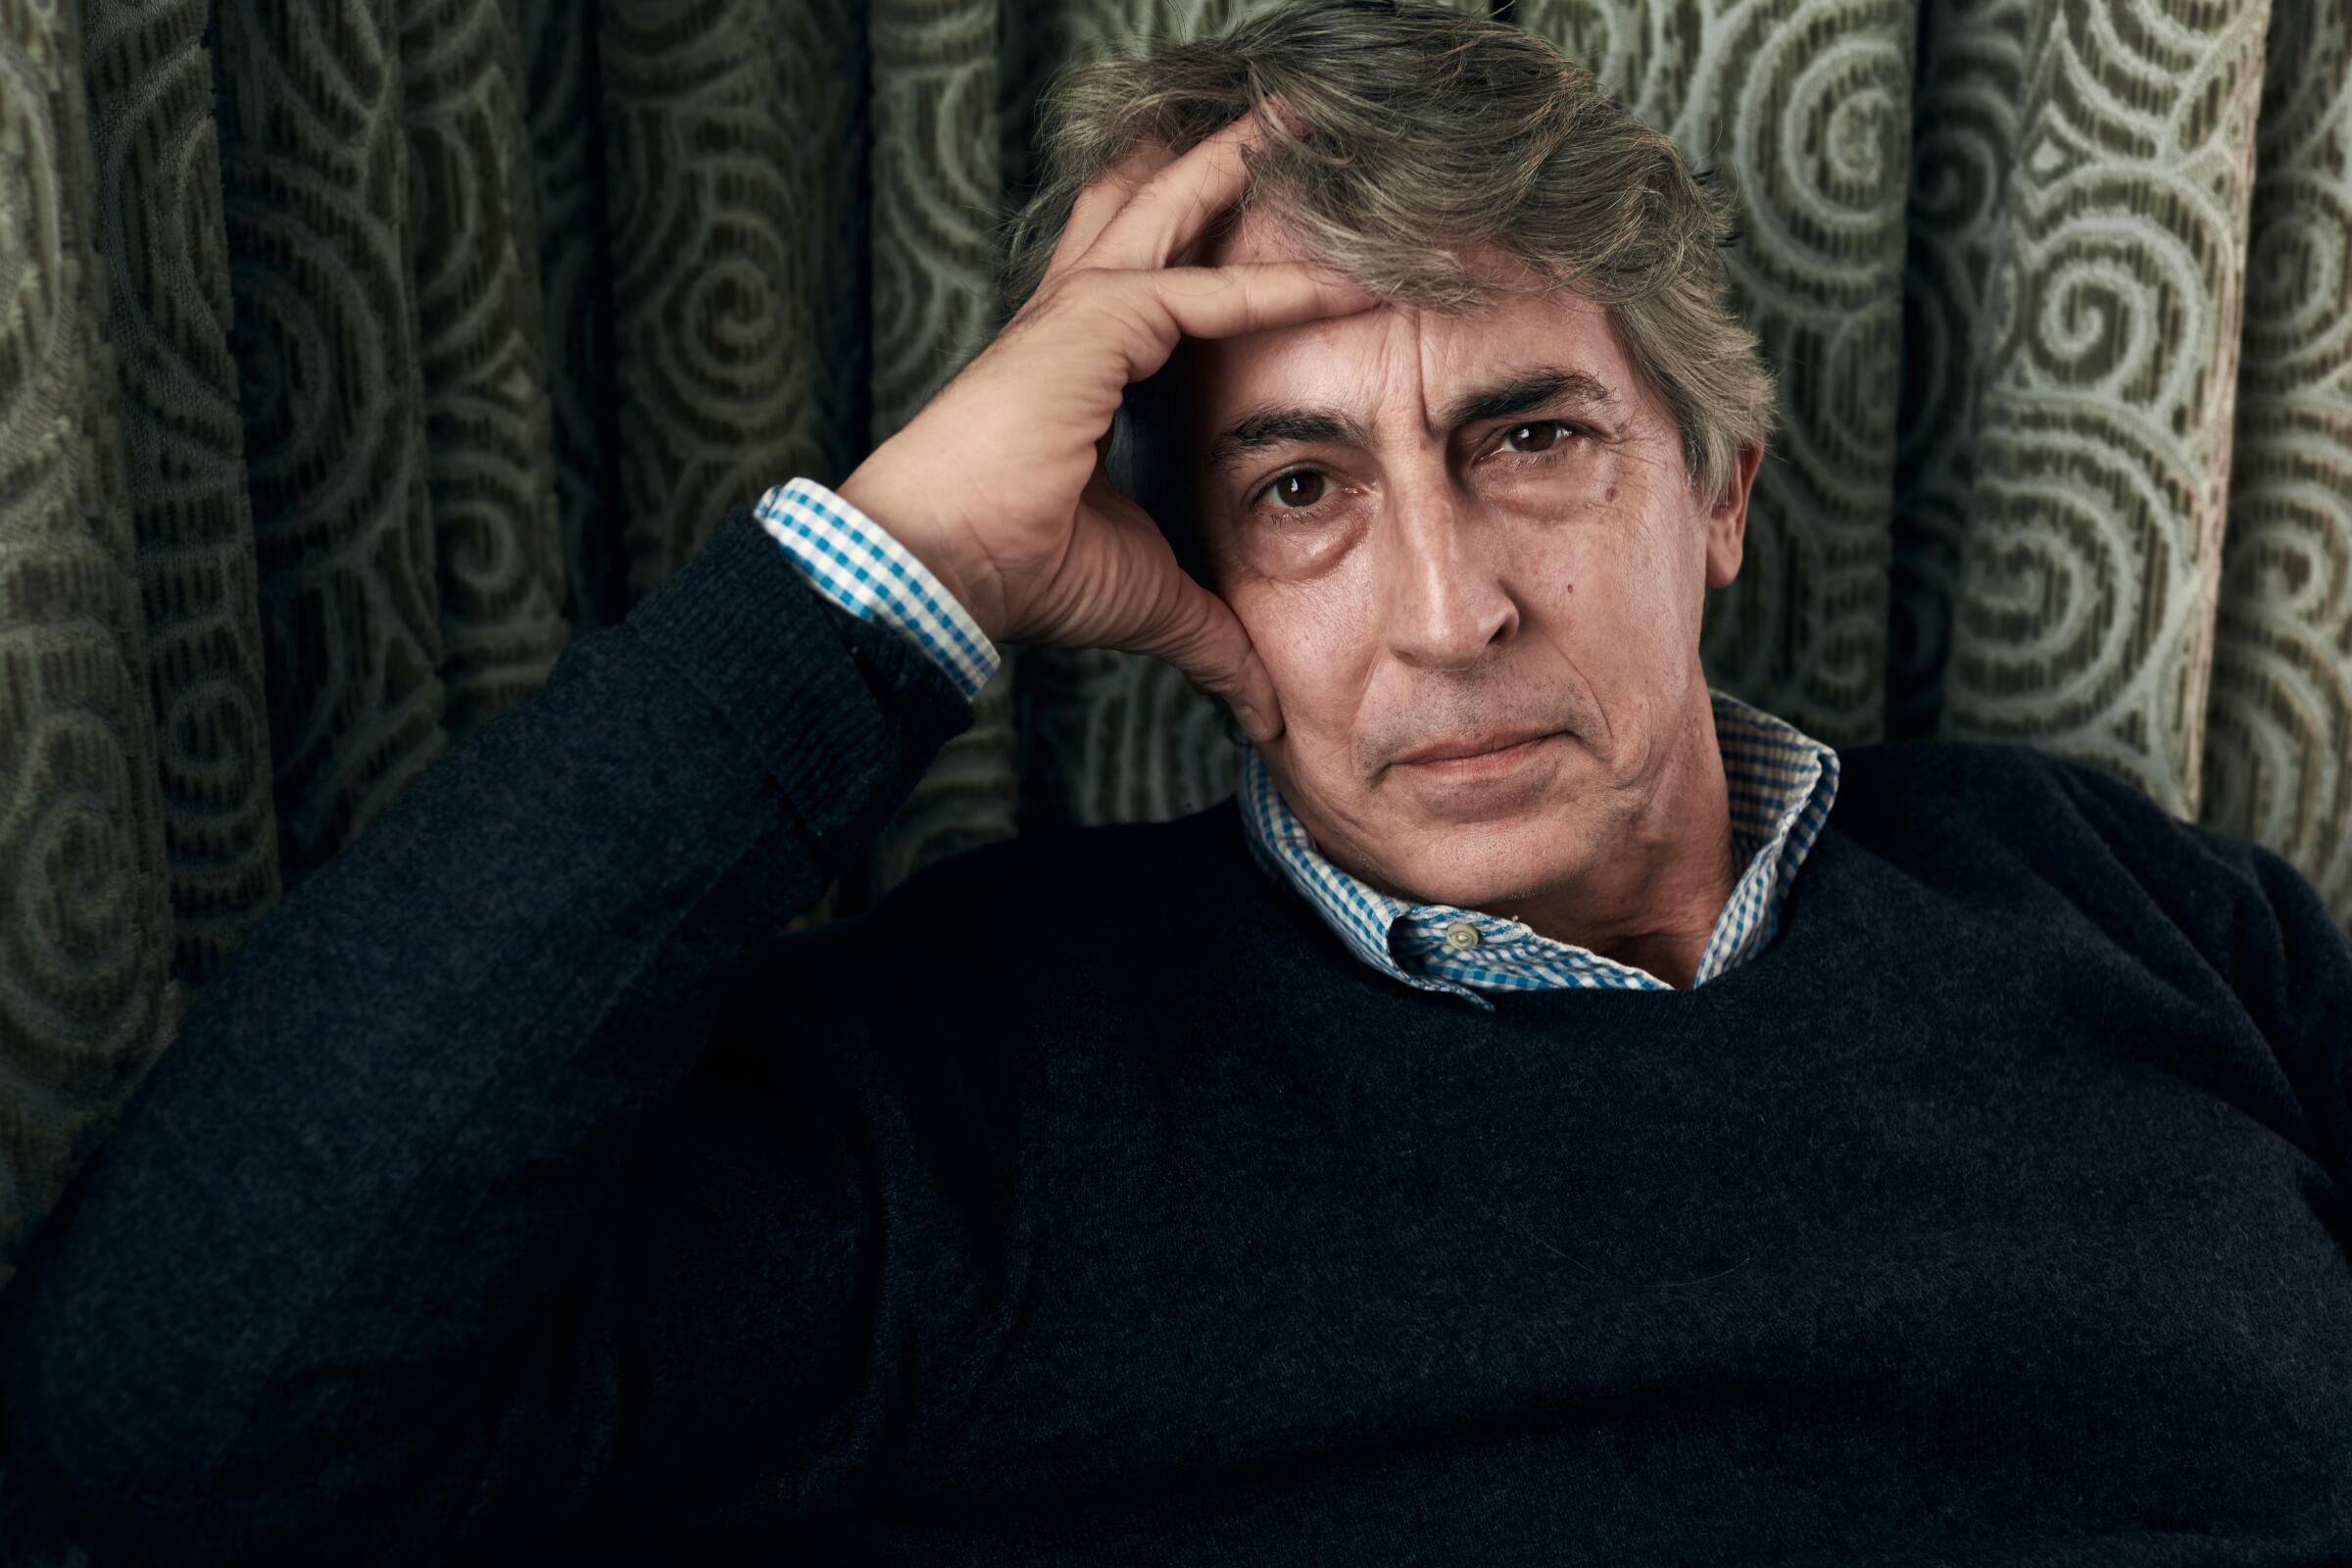 Alexander Payne holds a hand to his head as he poses for a portrait.